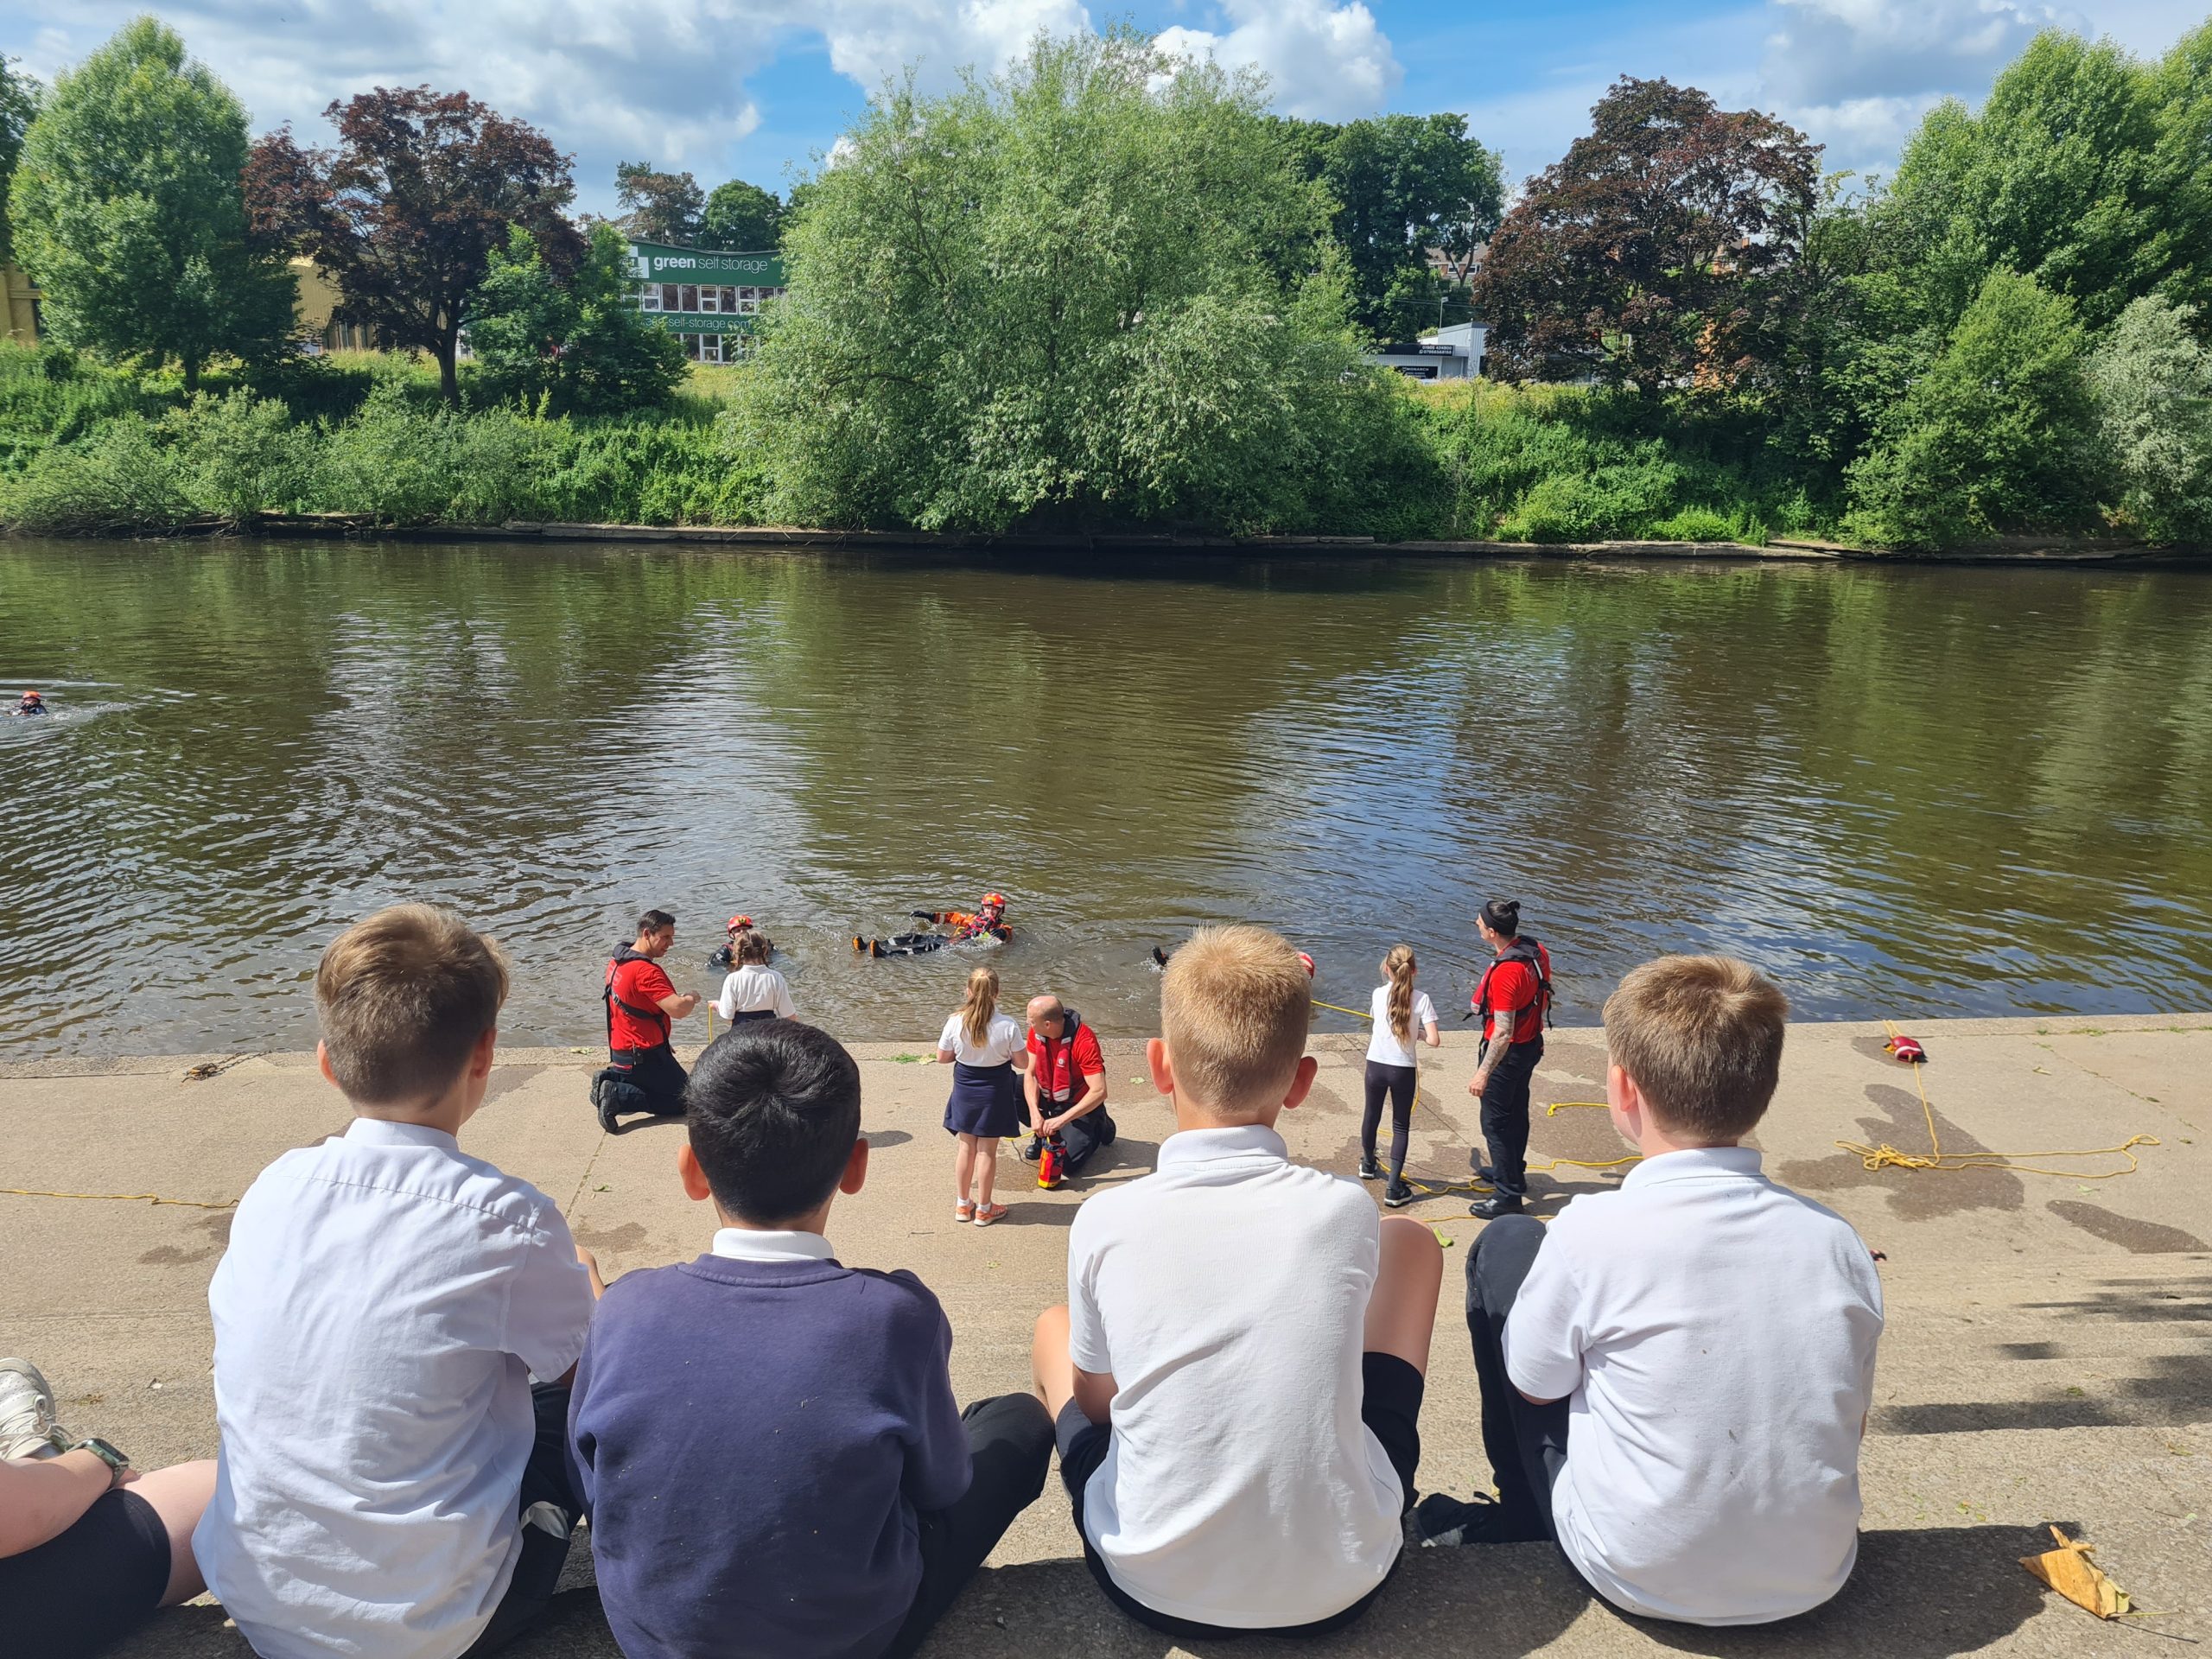 NEWS | Hereford & Worcester Fire and Rescue Service has been working with the RLSS Hereford & Worcester Branch to raise awareness of how to stay safe around water